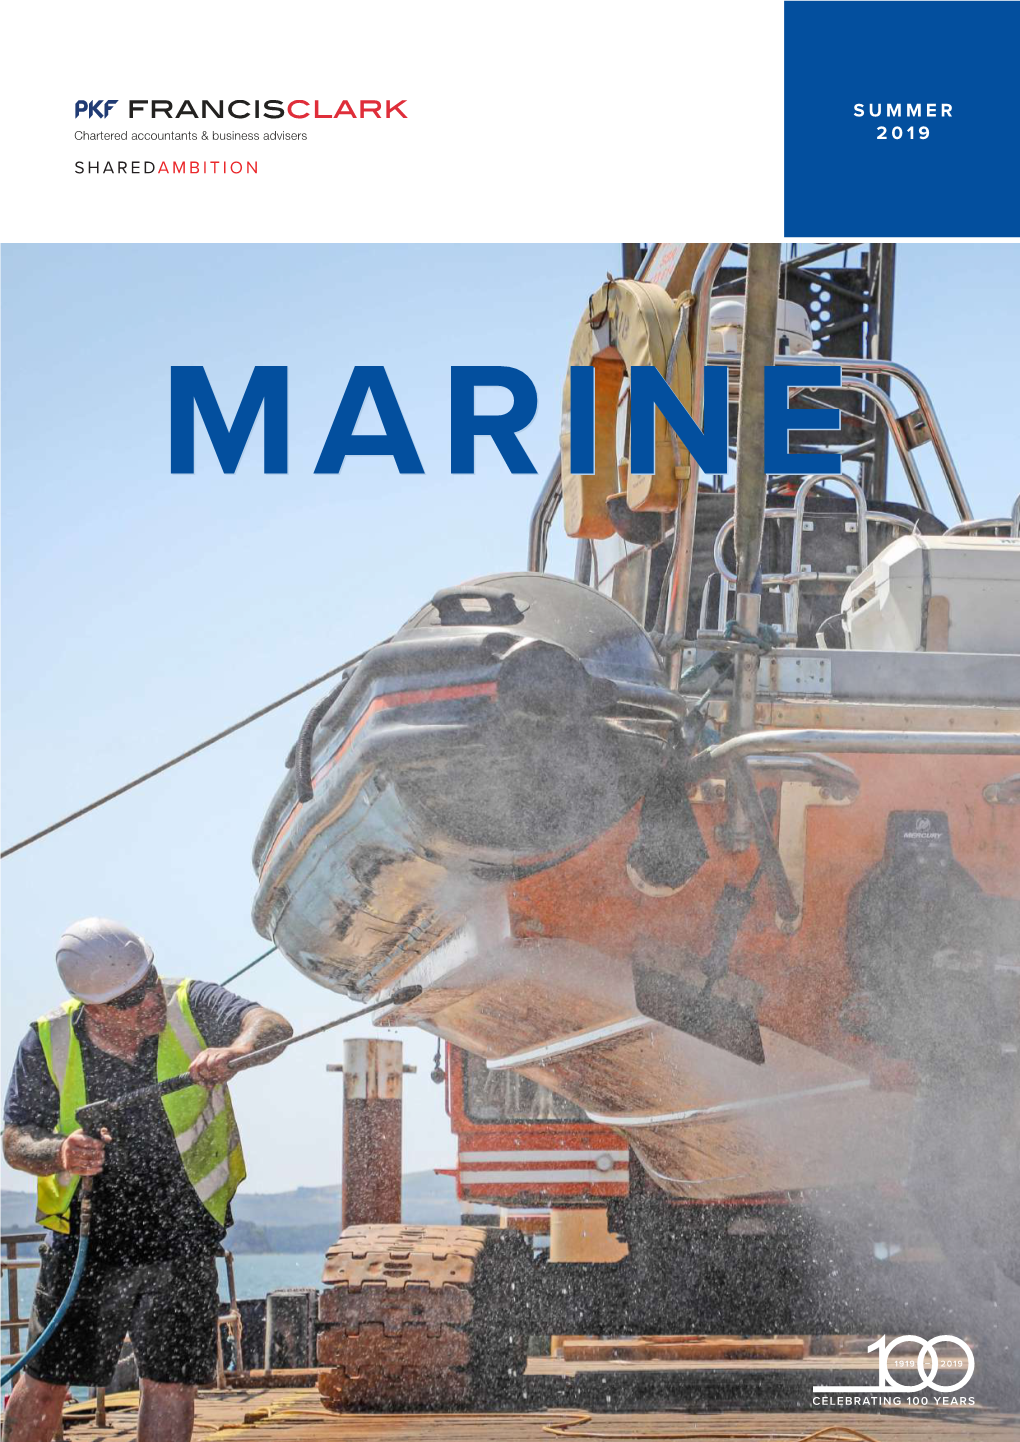 MARINE Welcome to the Summer 2019 Issue of the PKF DATES for YOUR DIARY Francis Clark Marine Newsletter